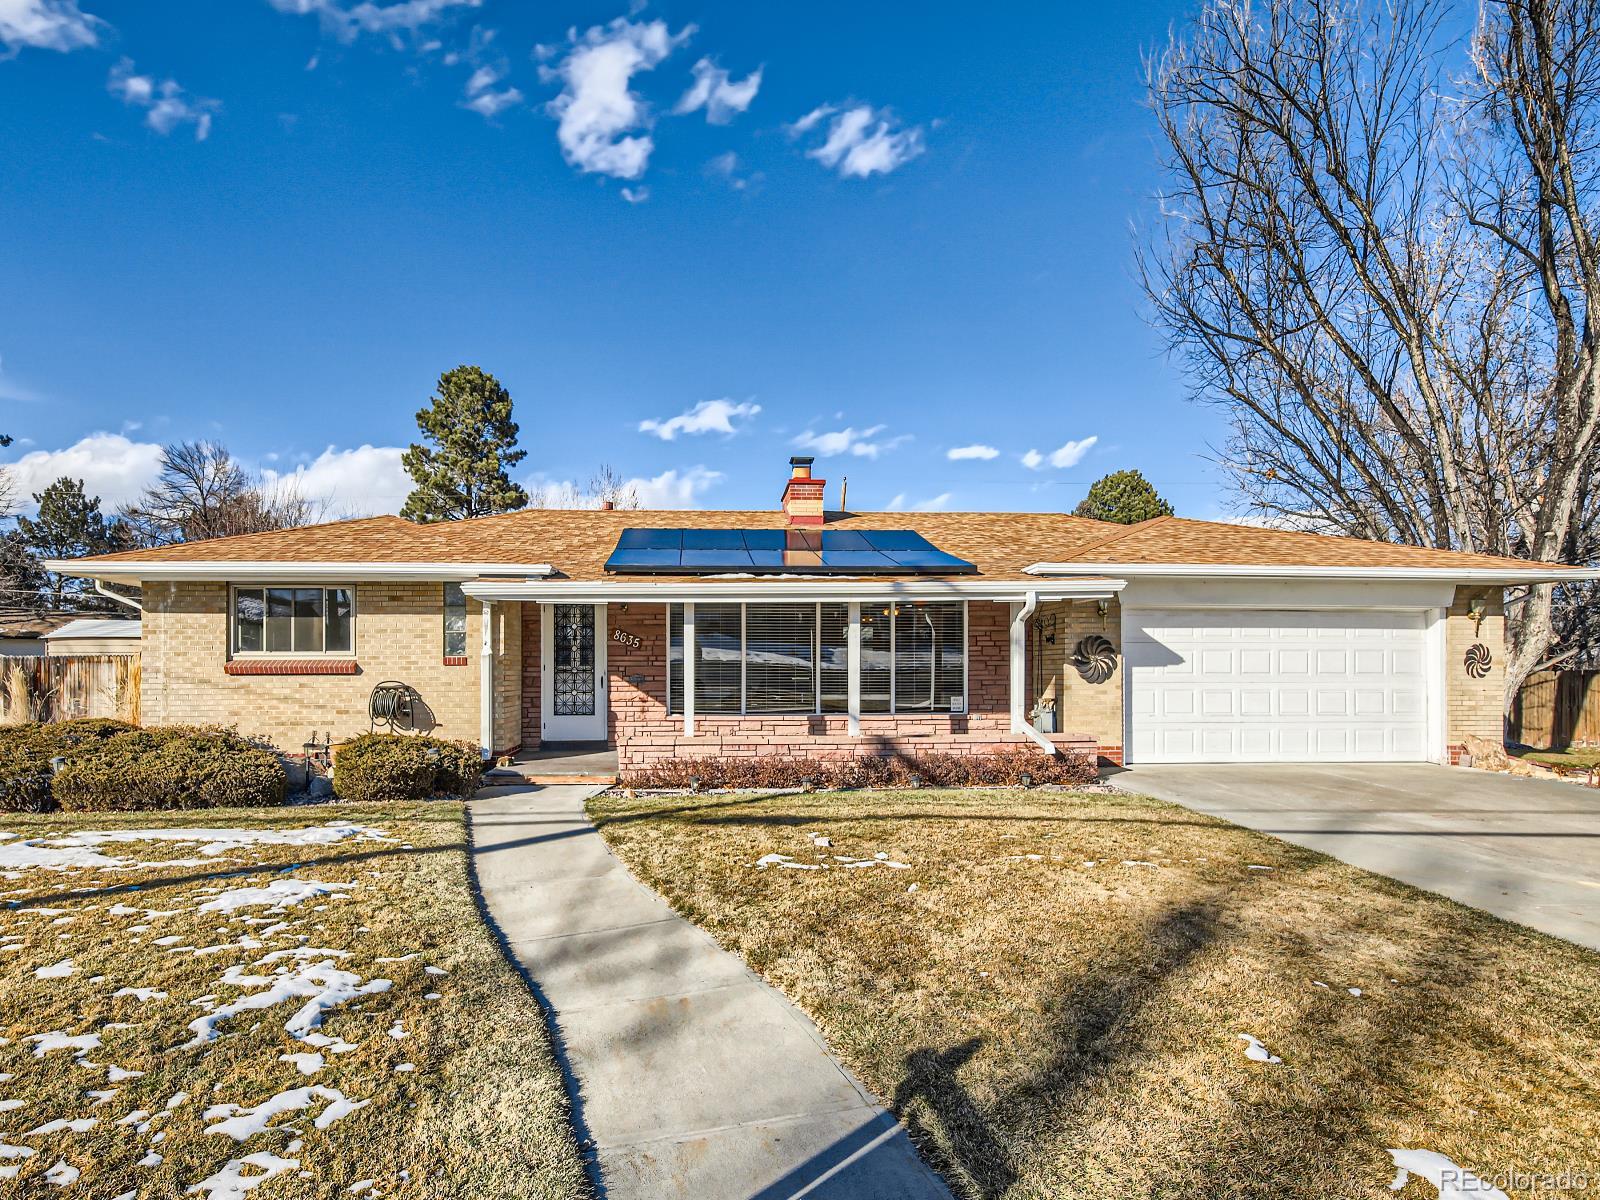 8635  grandview avenue, Arvada sold home. Closed on 2024-03-13 for $620,000.